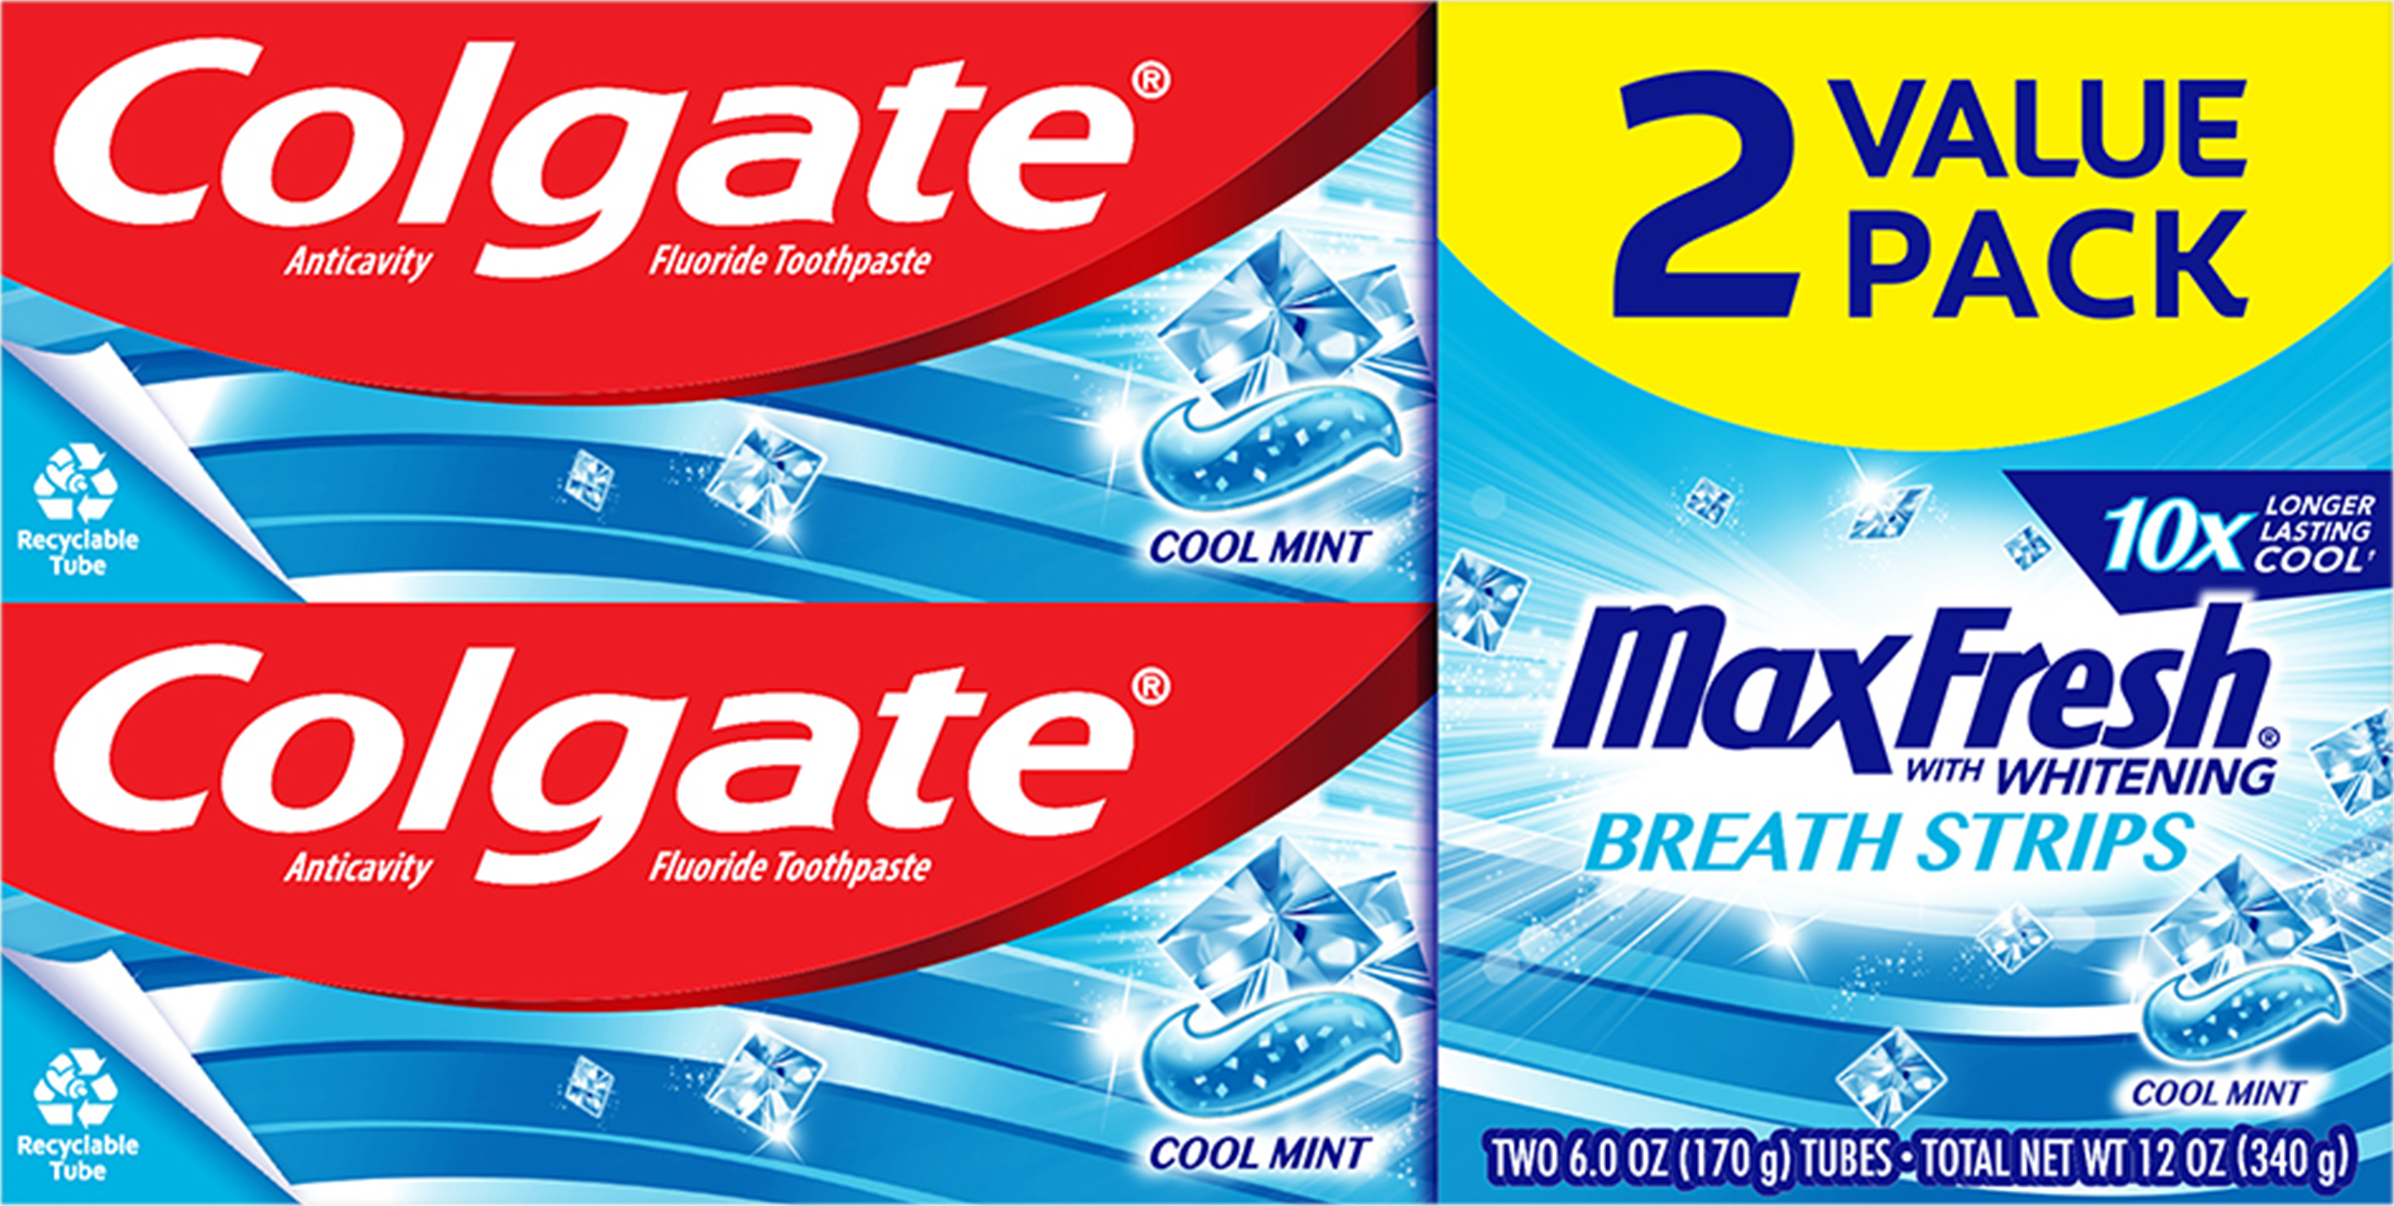 Colgate Activity Fluoride 2 Value Pack Cool Mint Toothpaste 2 ea